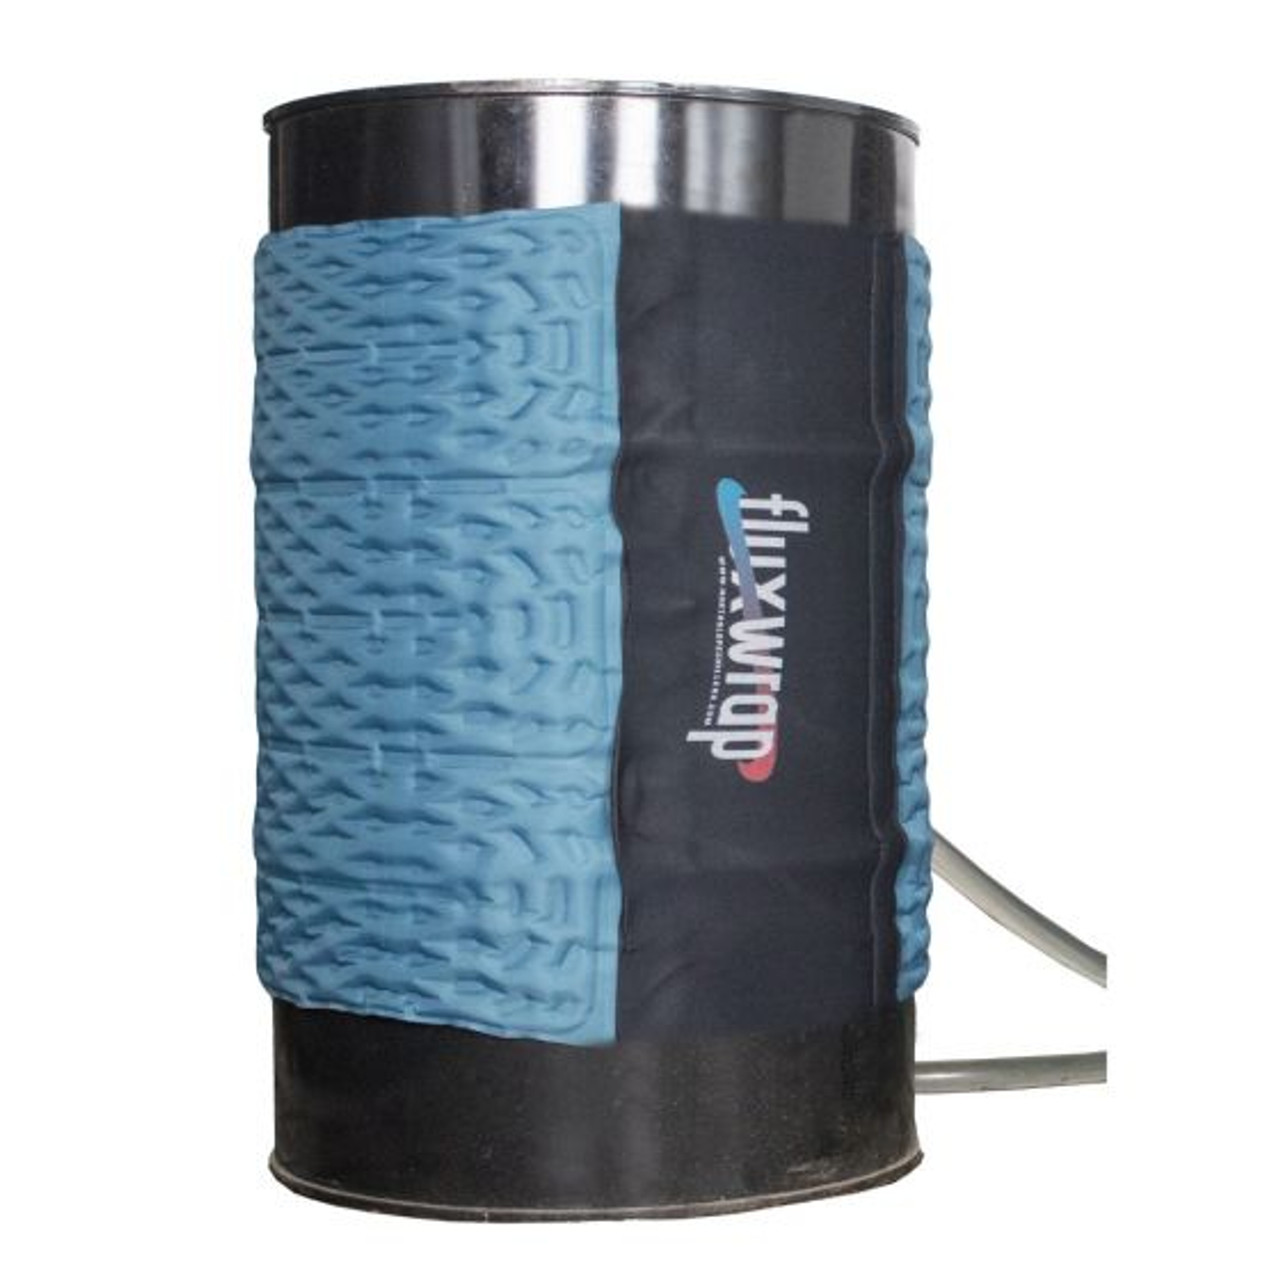 FLUXWRAP 30 GALLON DRUM INSULATED COOLING JACKET